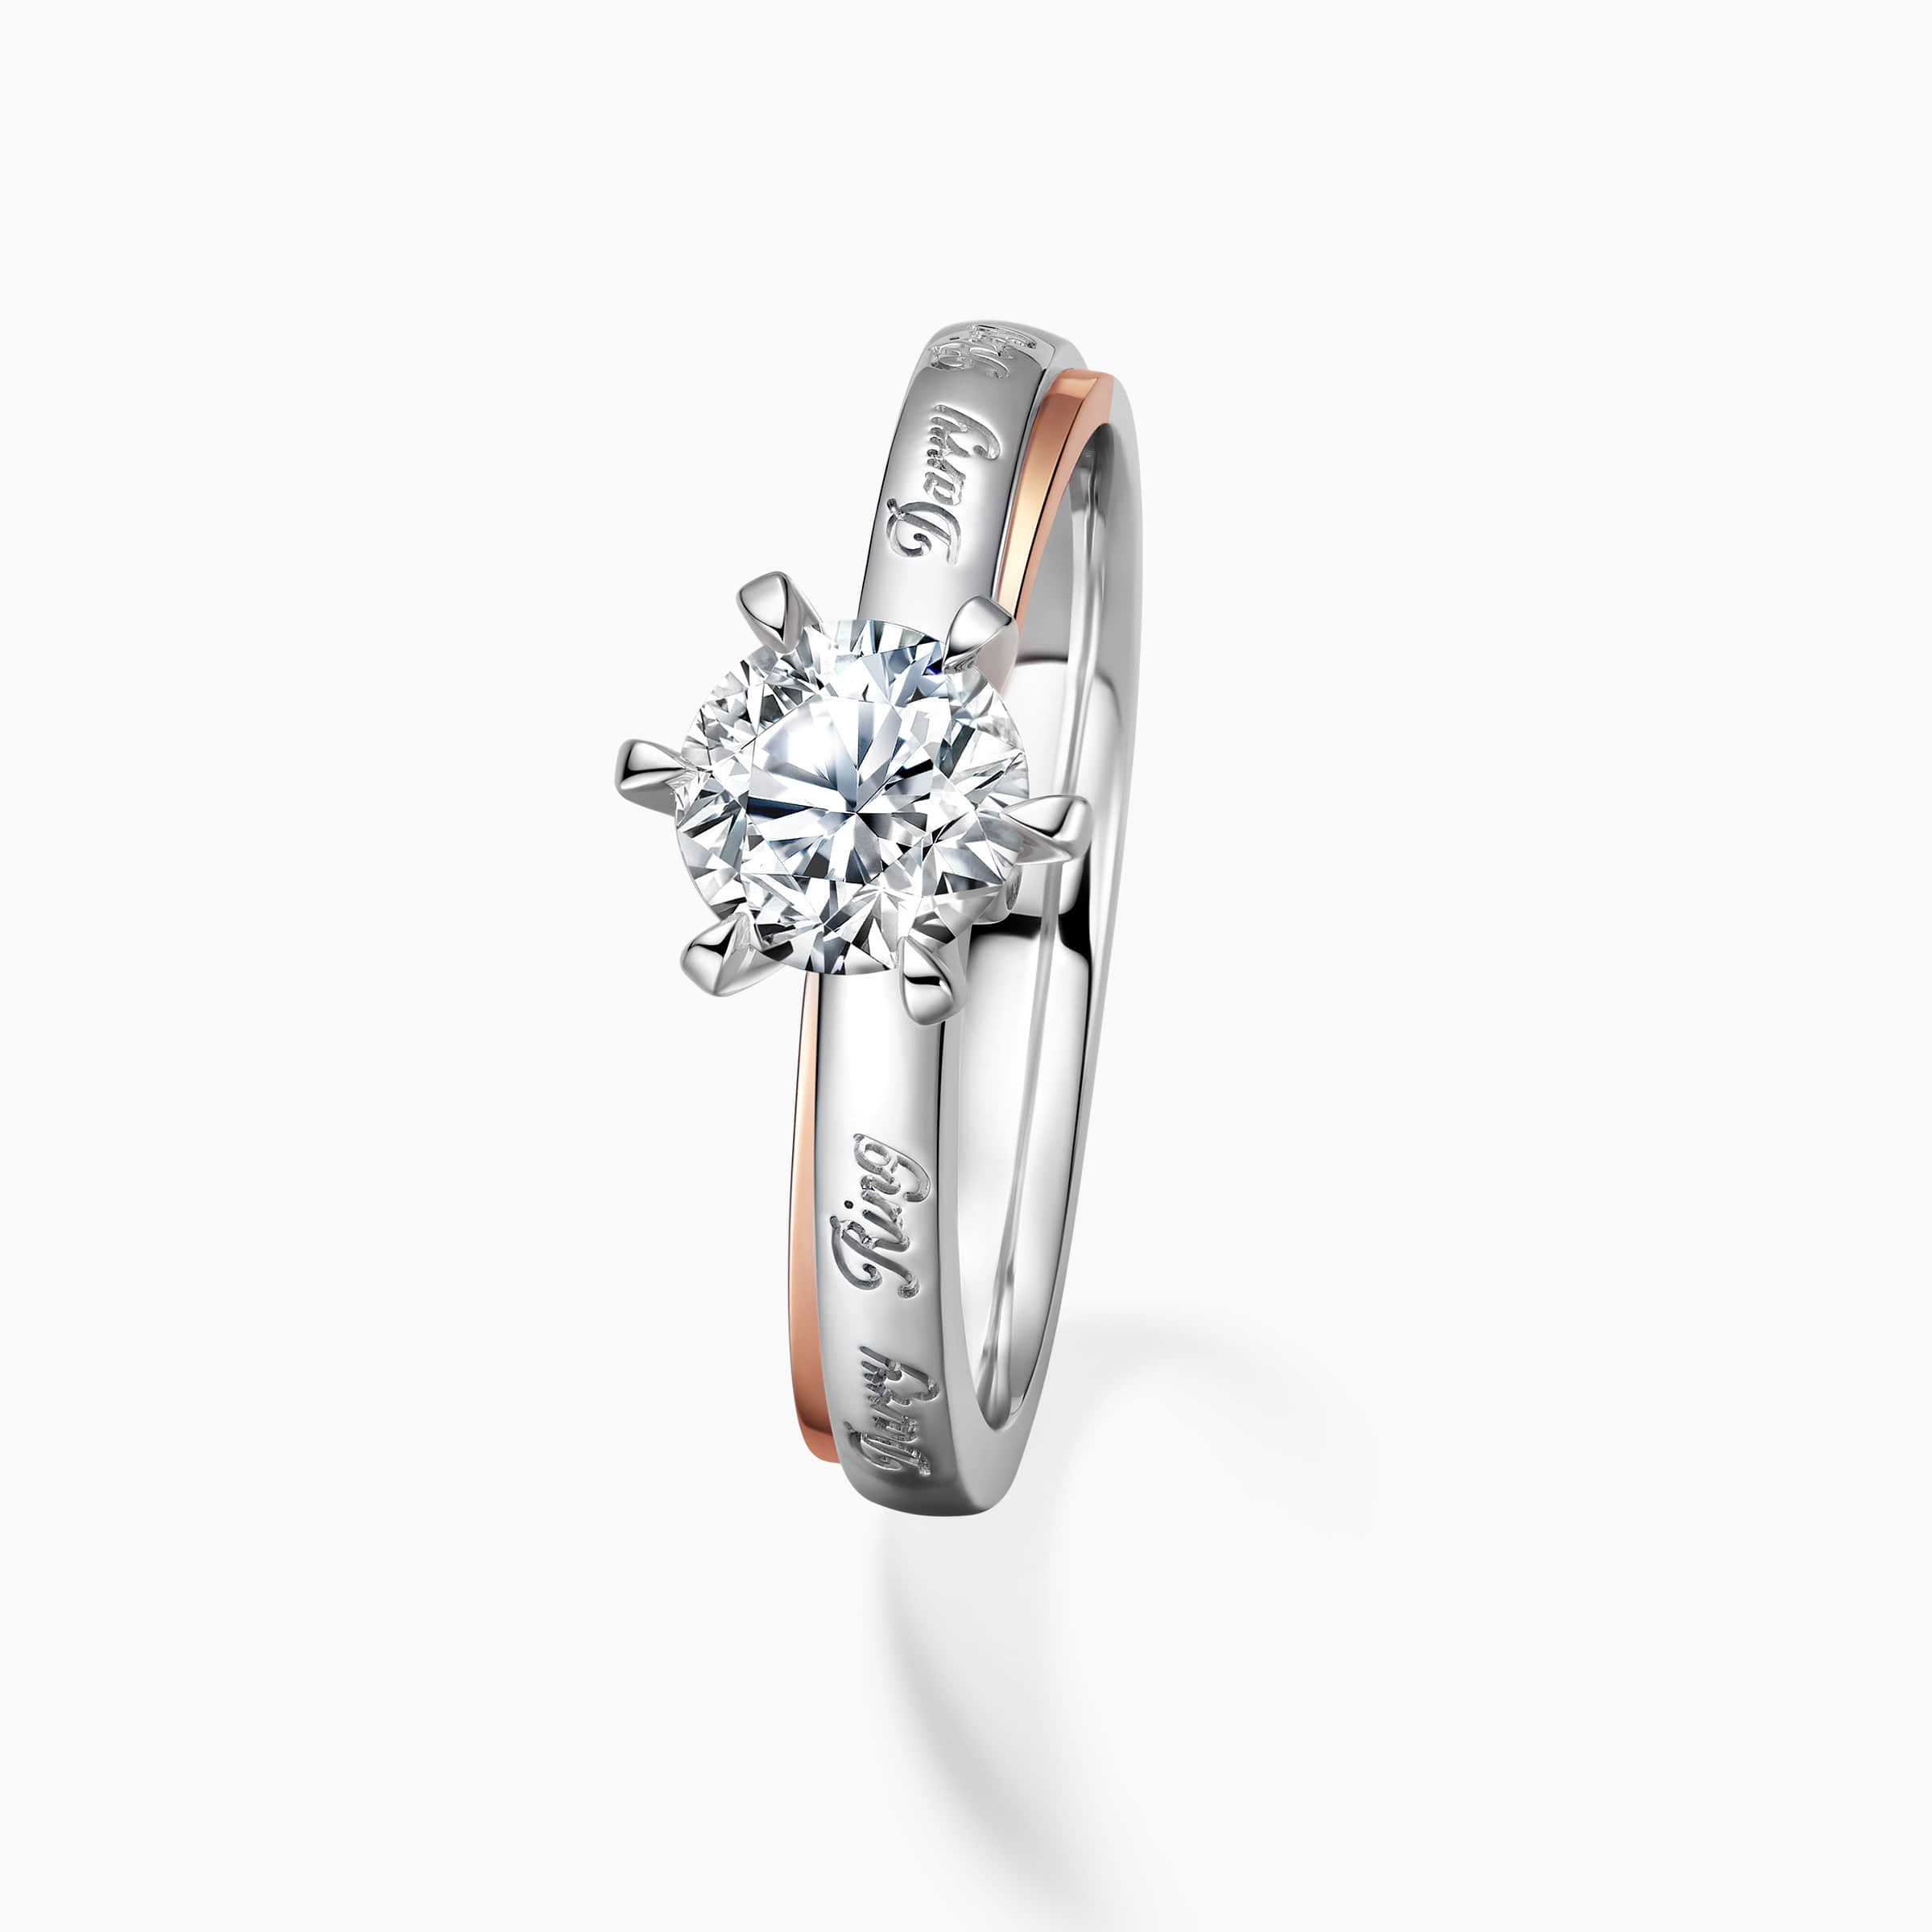 DR Love Mark solitaire engagement ring with Darry Ring logo